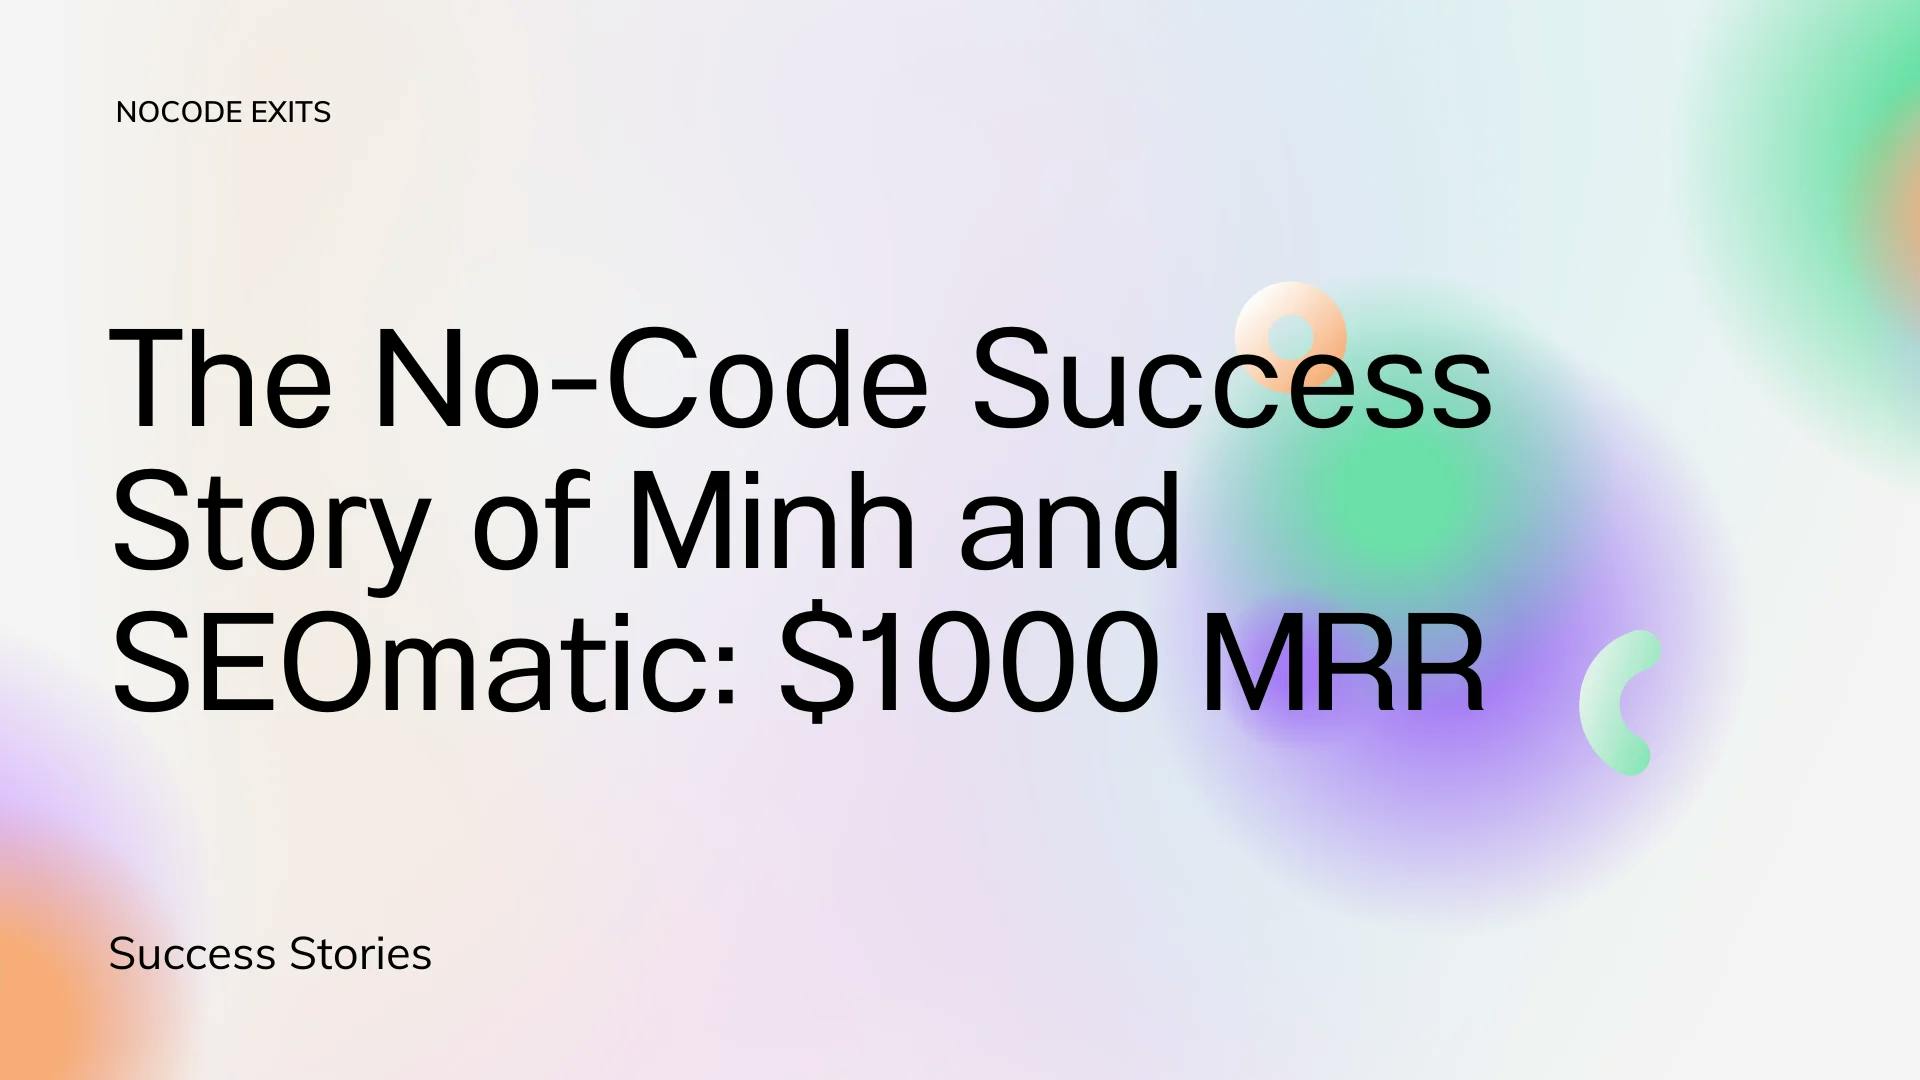 The No-Code Success Story of Minh and SEOmatic: Programmatic SEO SaaS with $1000 MRR